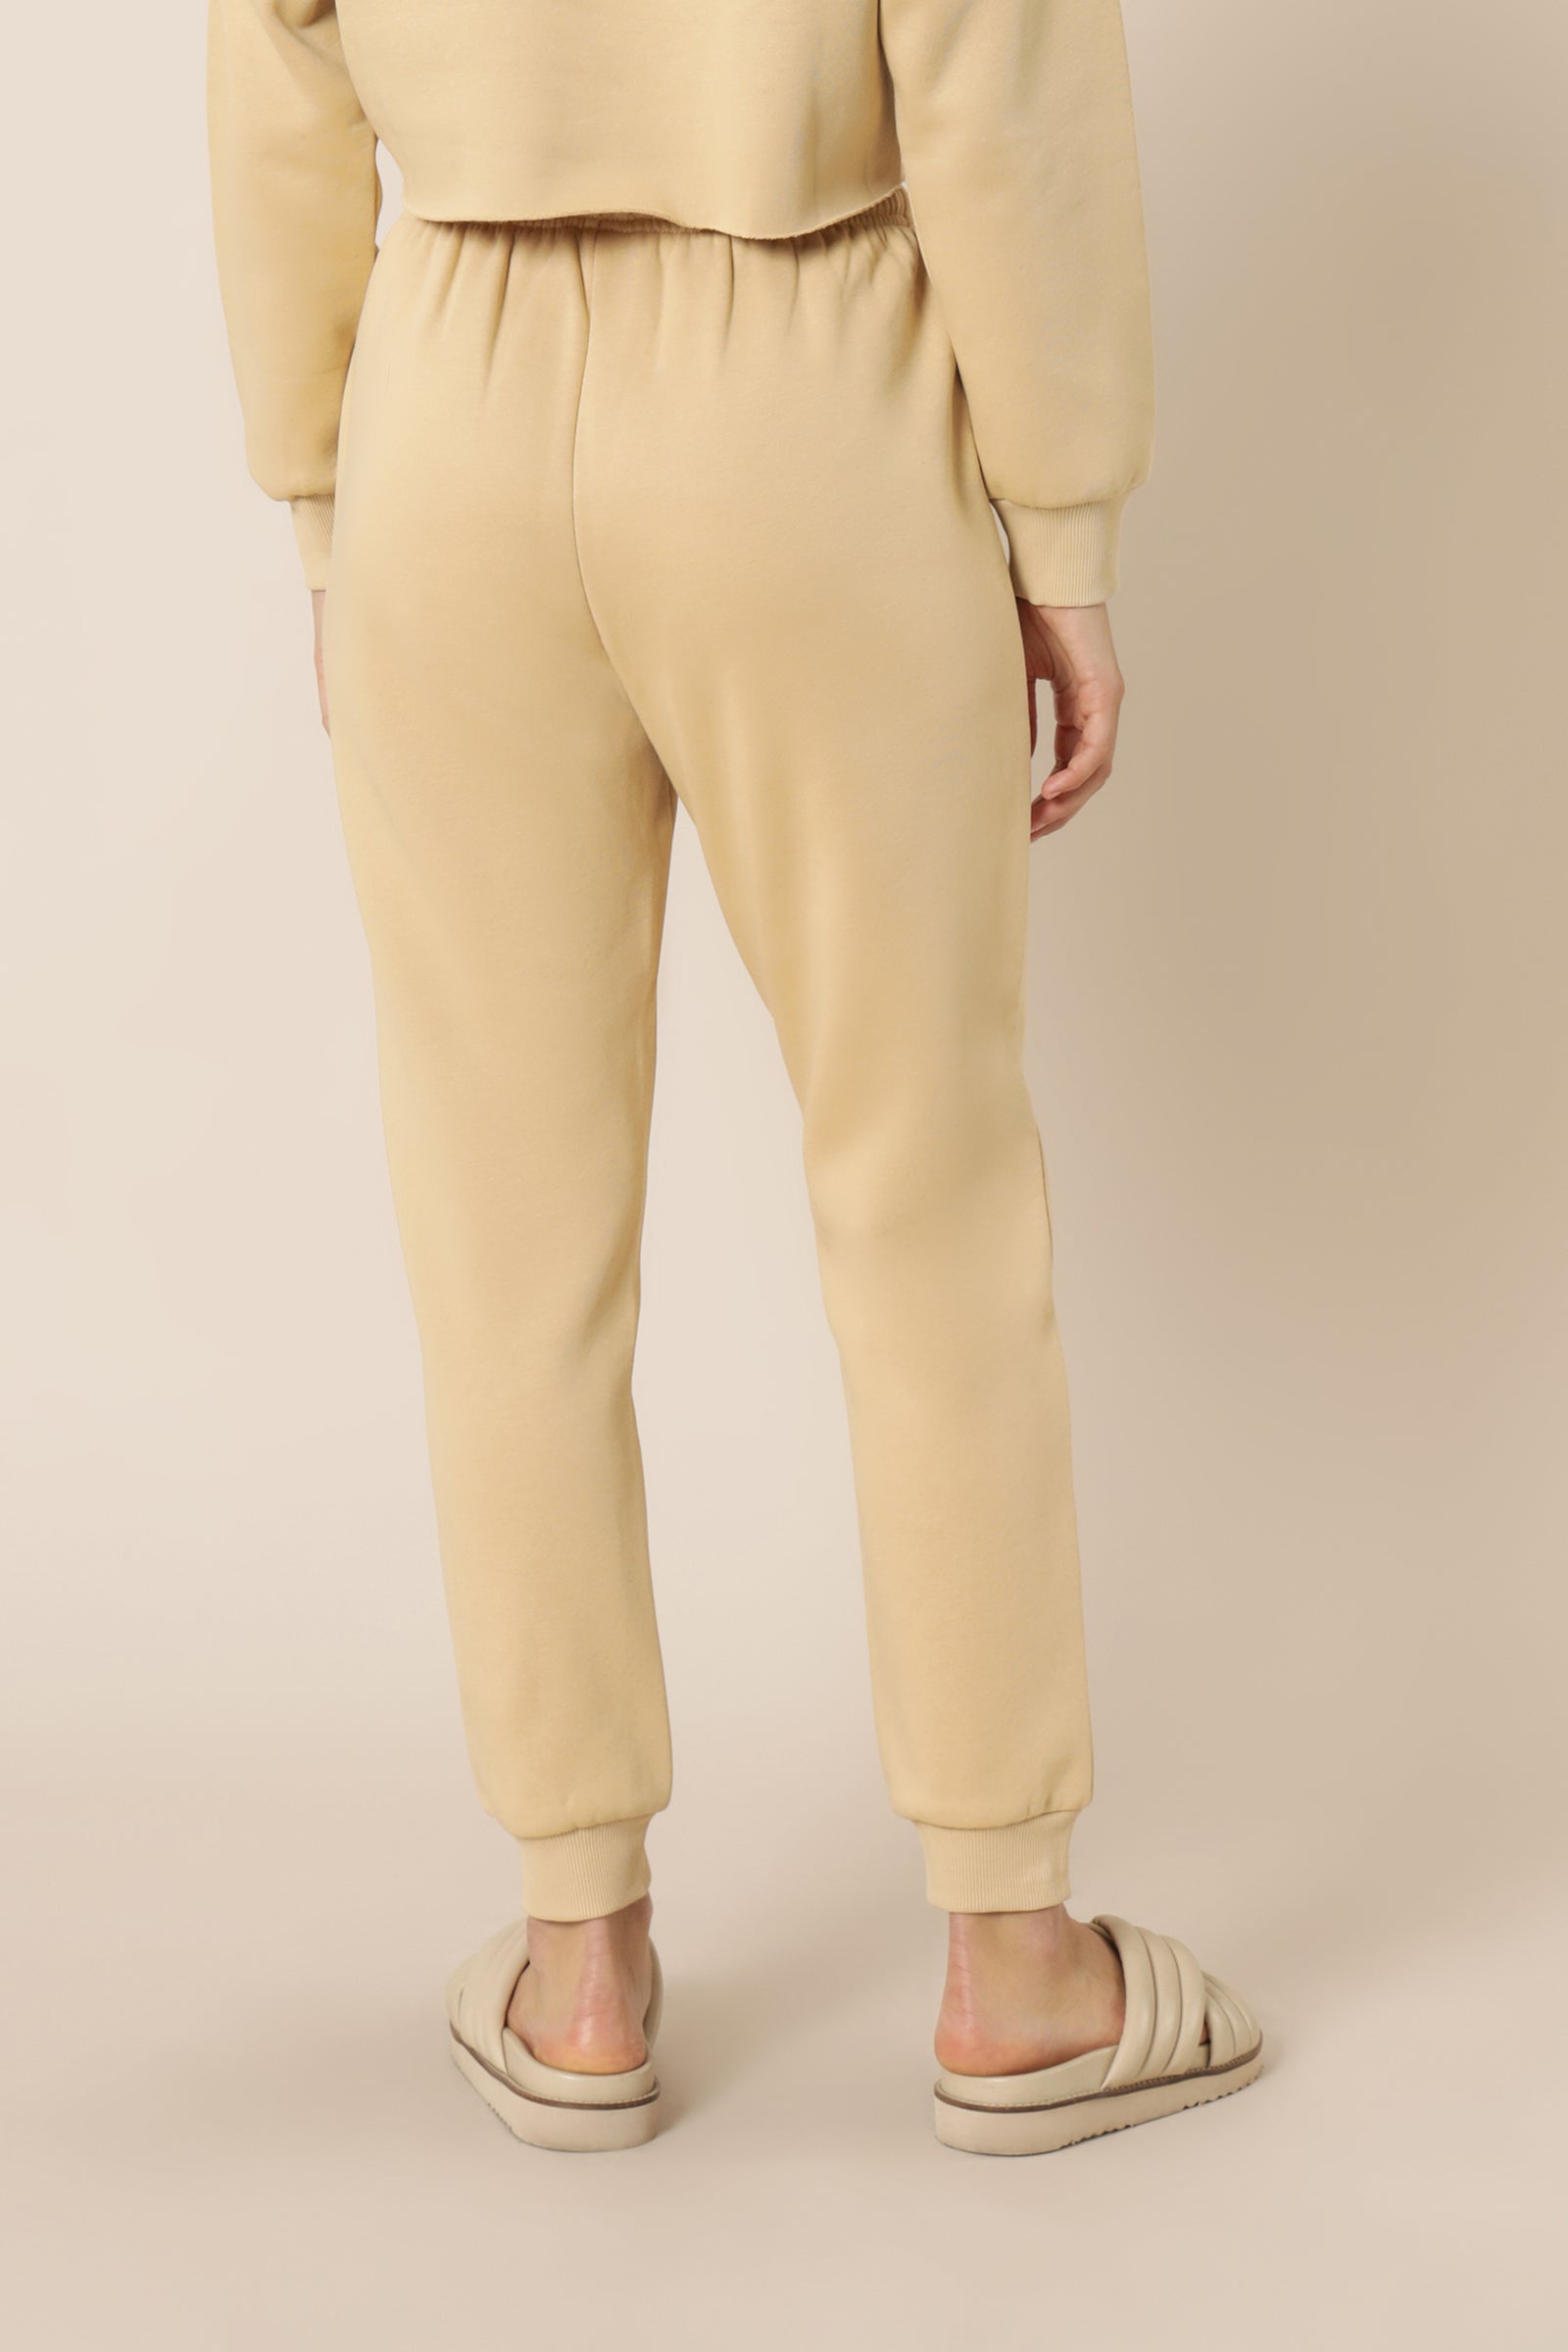 Nude Lucy carter classic trackpant honey sweats